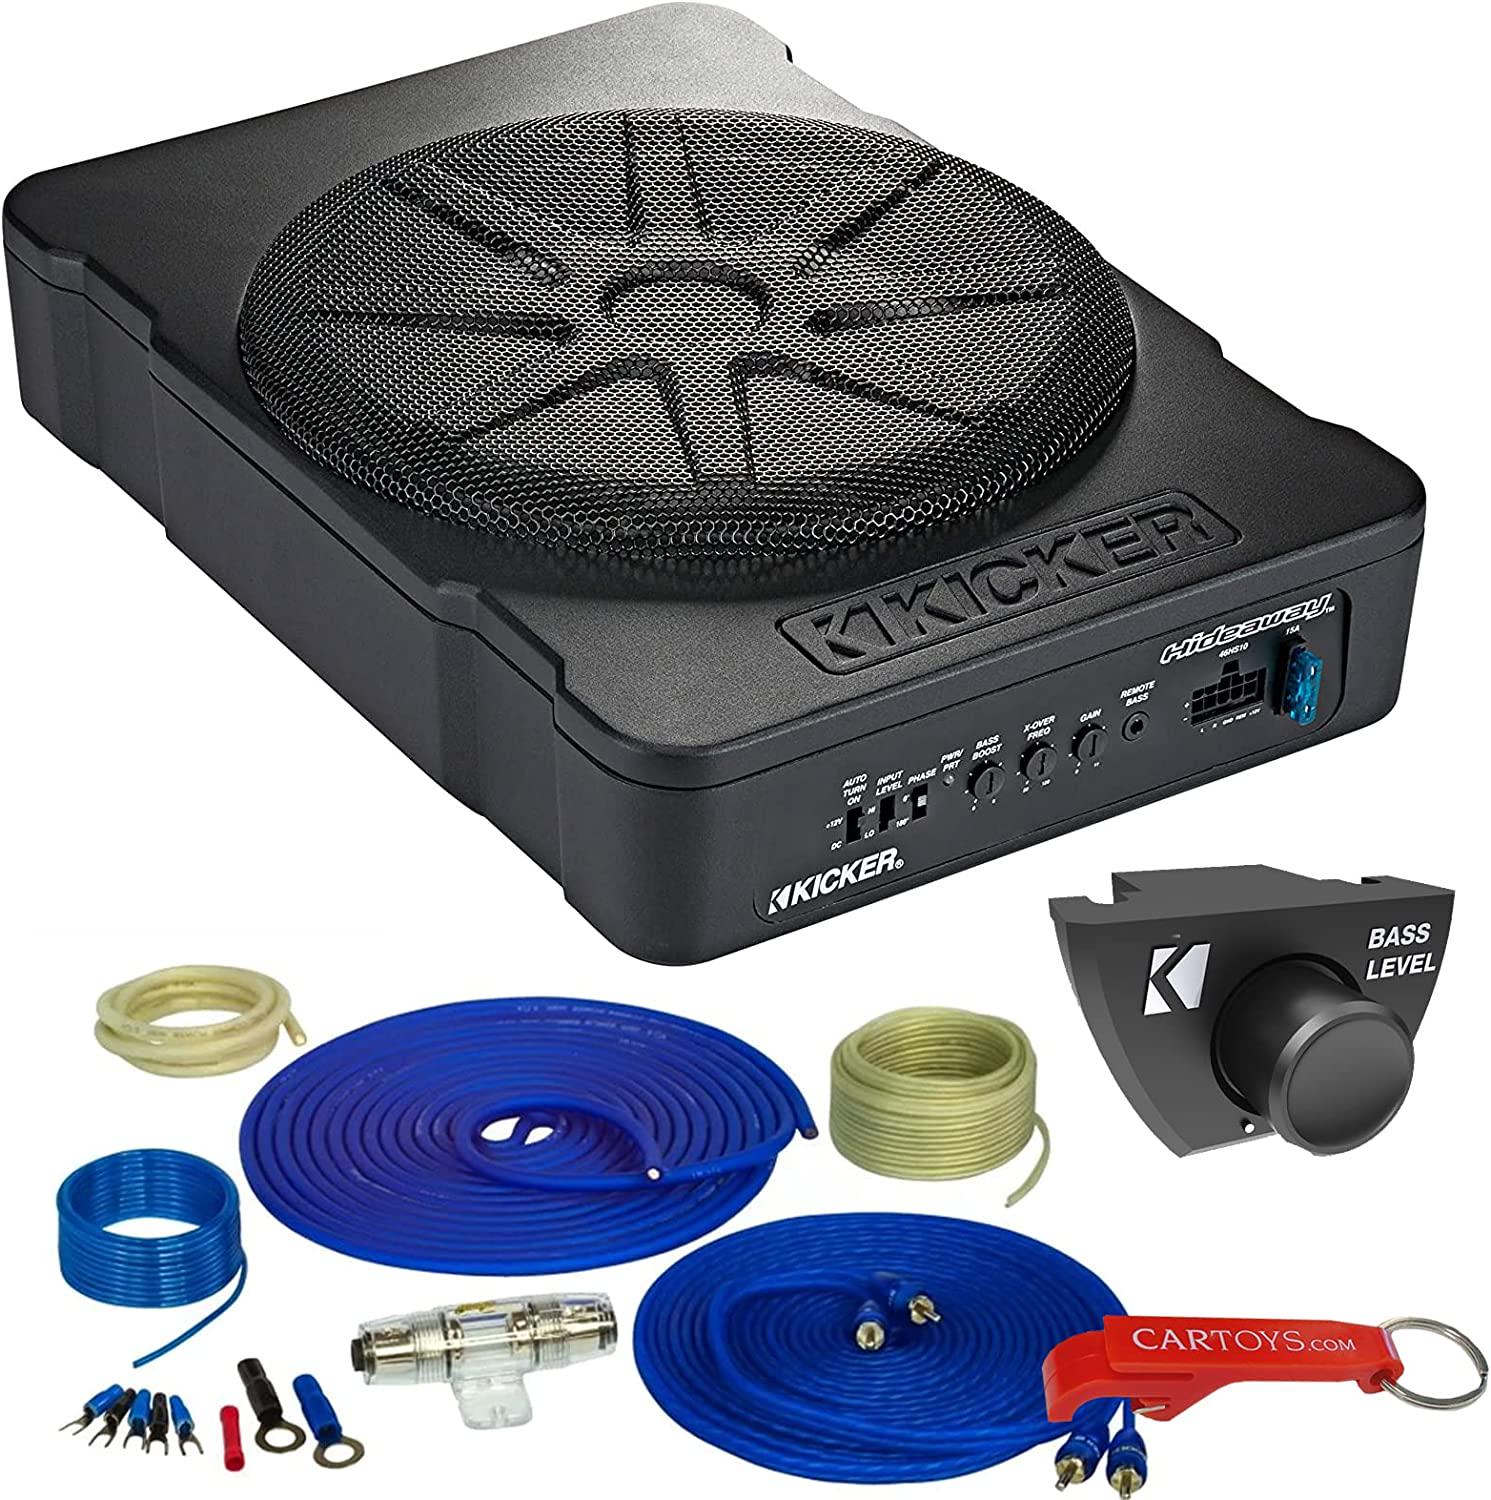 Kicker, Kicker 46HS10 Hideaway Powered 10-Inch Amplified Subwoofer and 8 Ga. Amp Kit Bundle. Compact Amplified 10 Car Audio Sub, 180 Watt RMS, Wired Bass Knob w/Cable and Full Copper Stinger Amp Kit Included